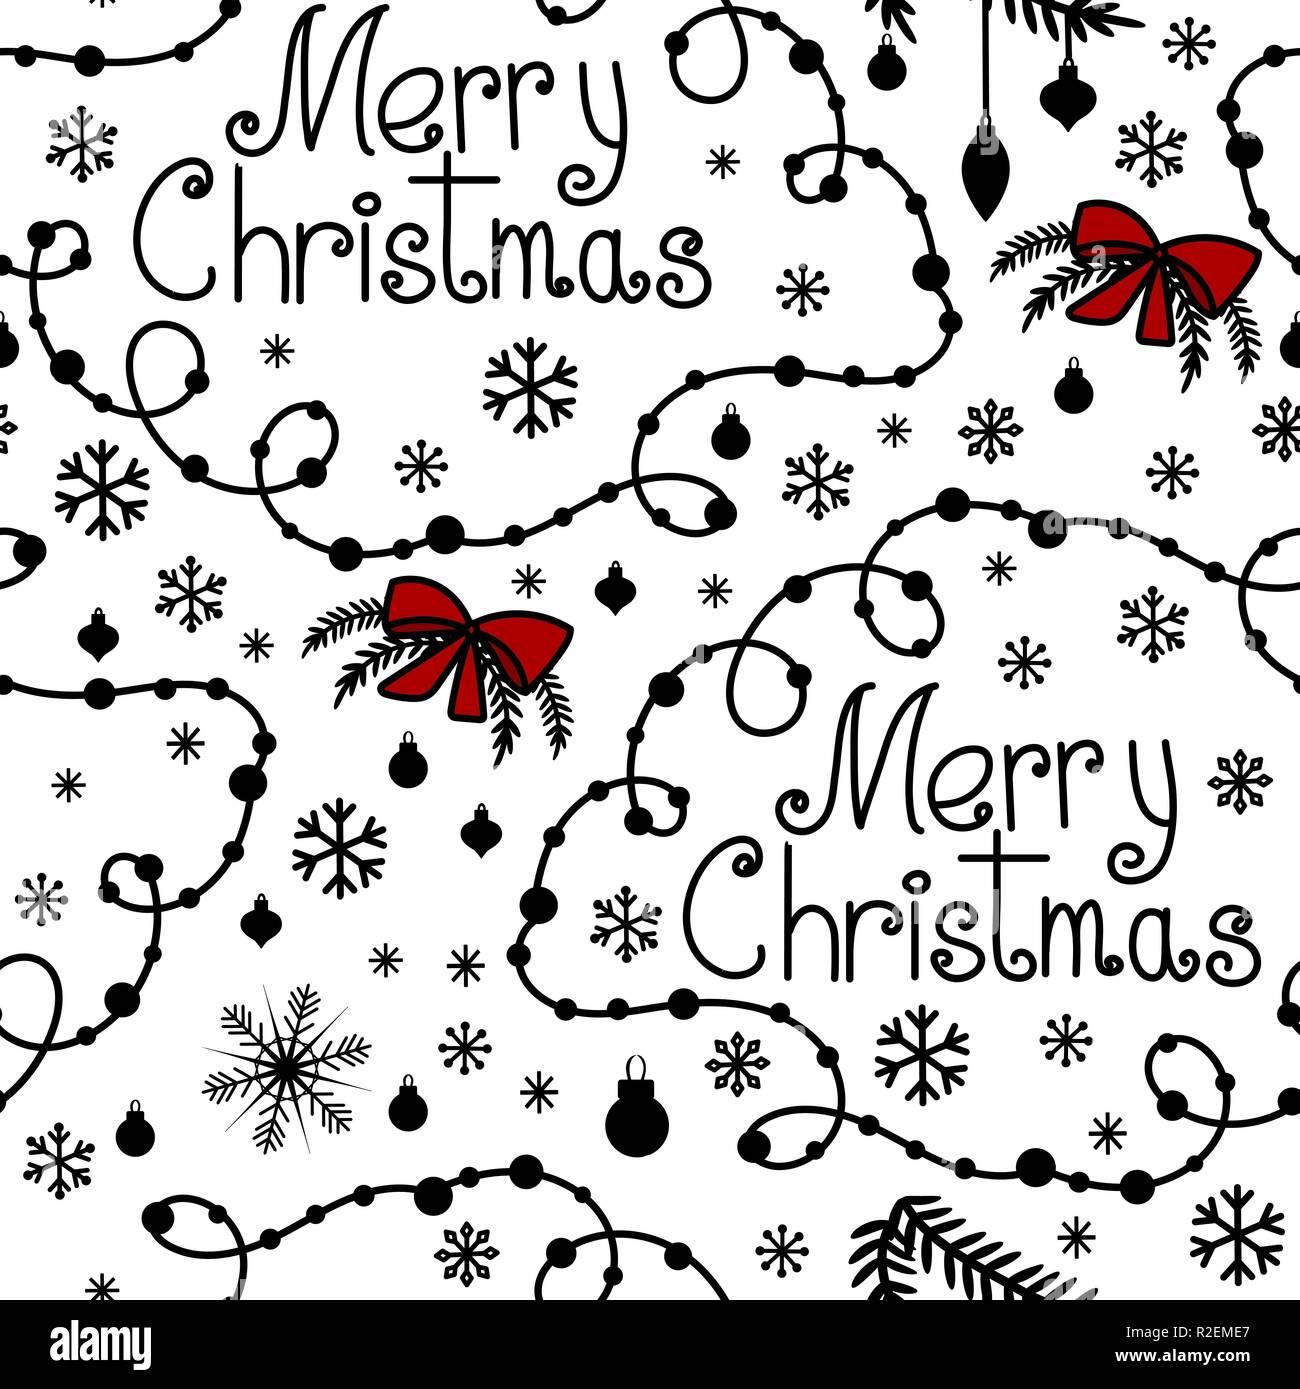 Merry Christmas background with hand drawn text swirls and